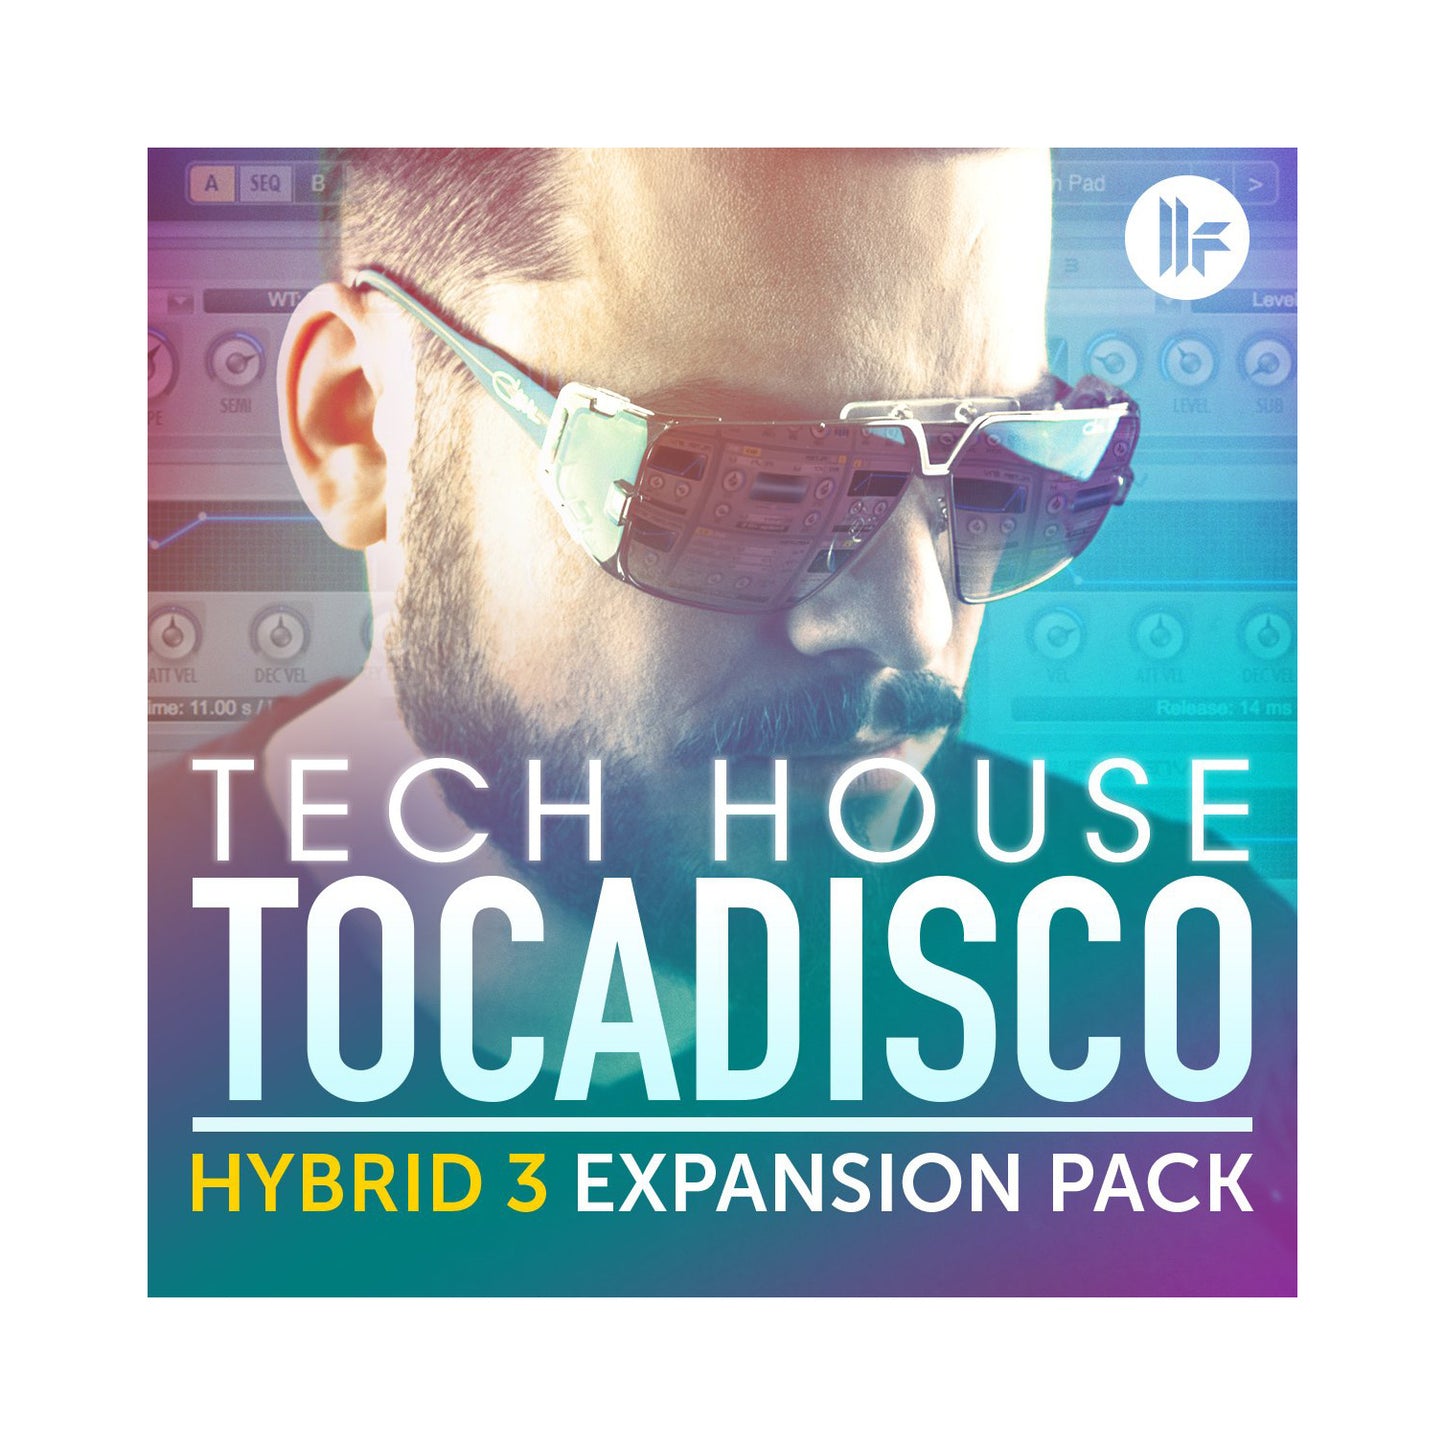 Air Music Technology Tocadisco Expansion Pack